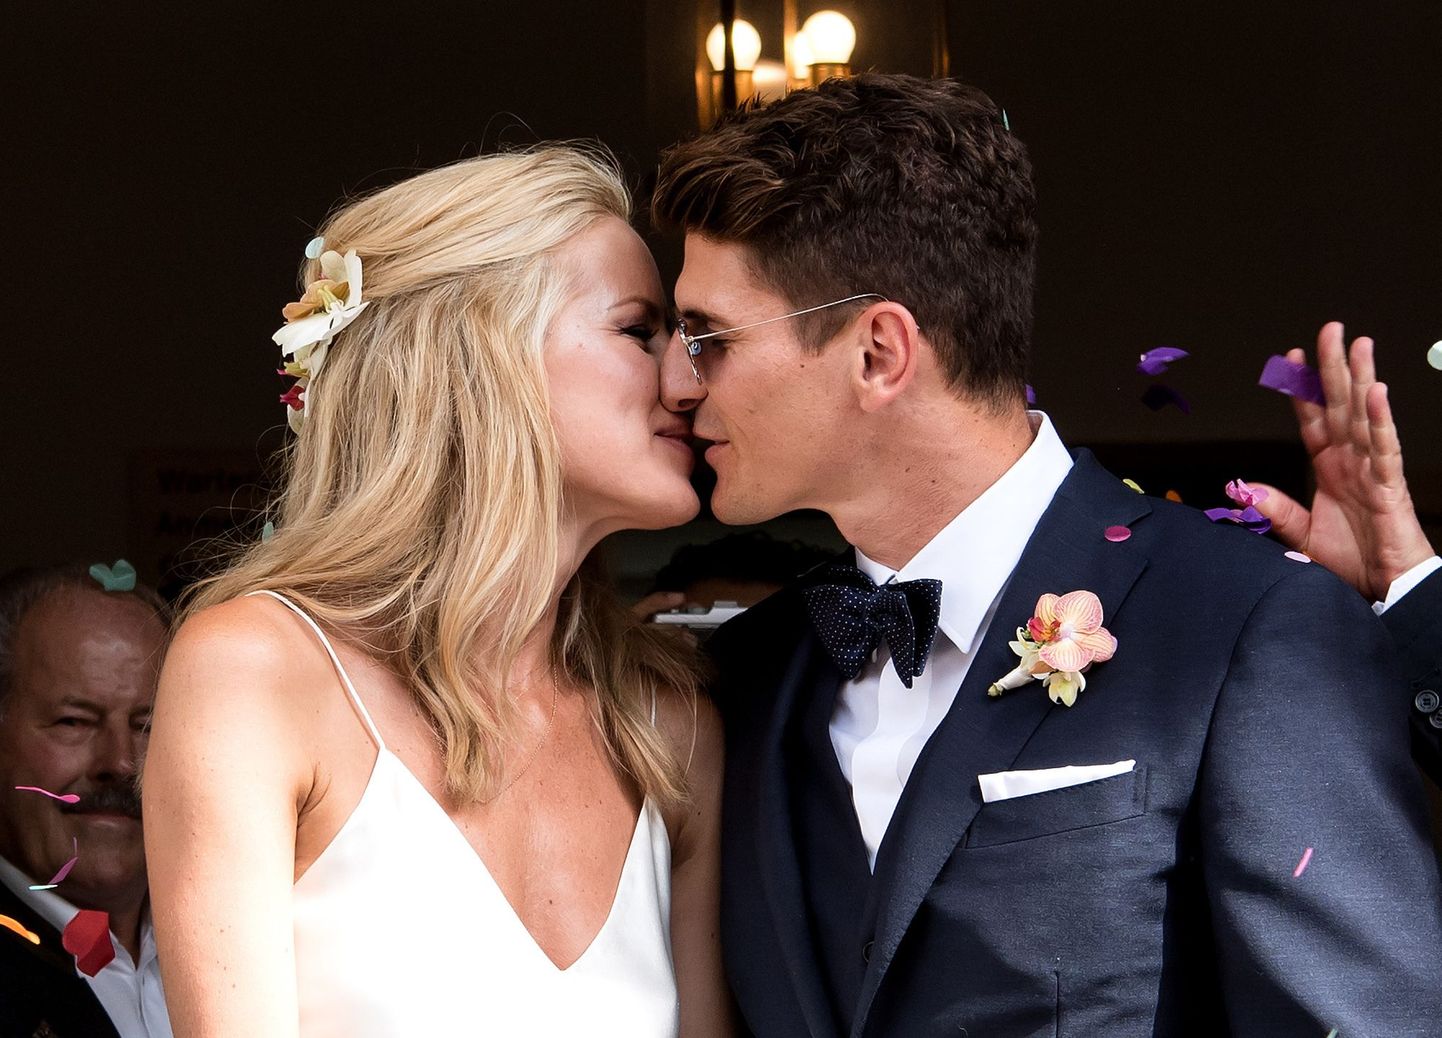 German soccer player Mario Gomez and his wife Carina kiss after their civil marriage at the registry office Schwabing in Munich, Germany, Friday, 22 July, 2016. (Sven Hoppe/dpa via AP)